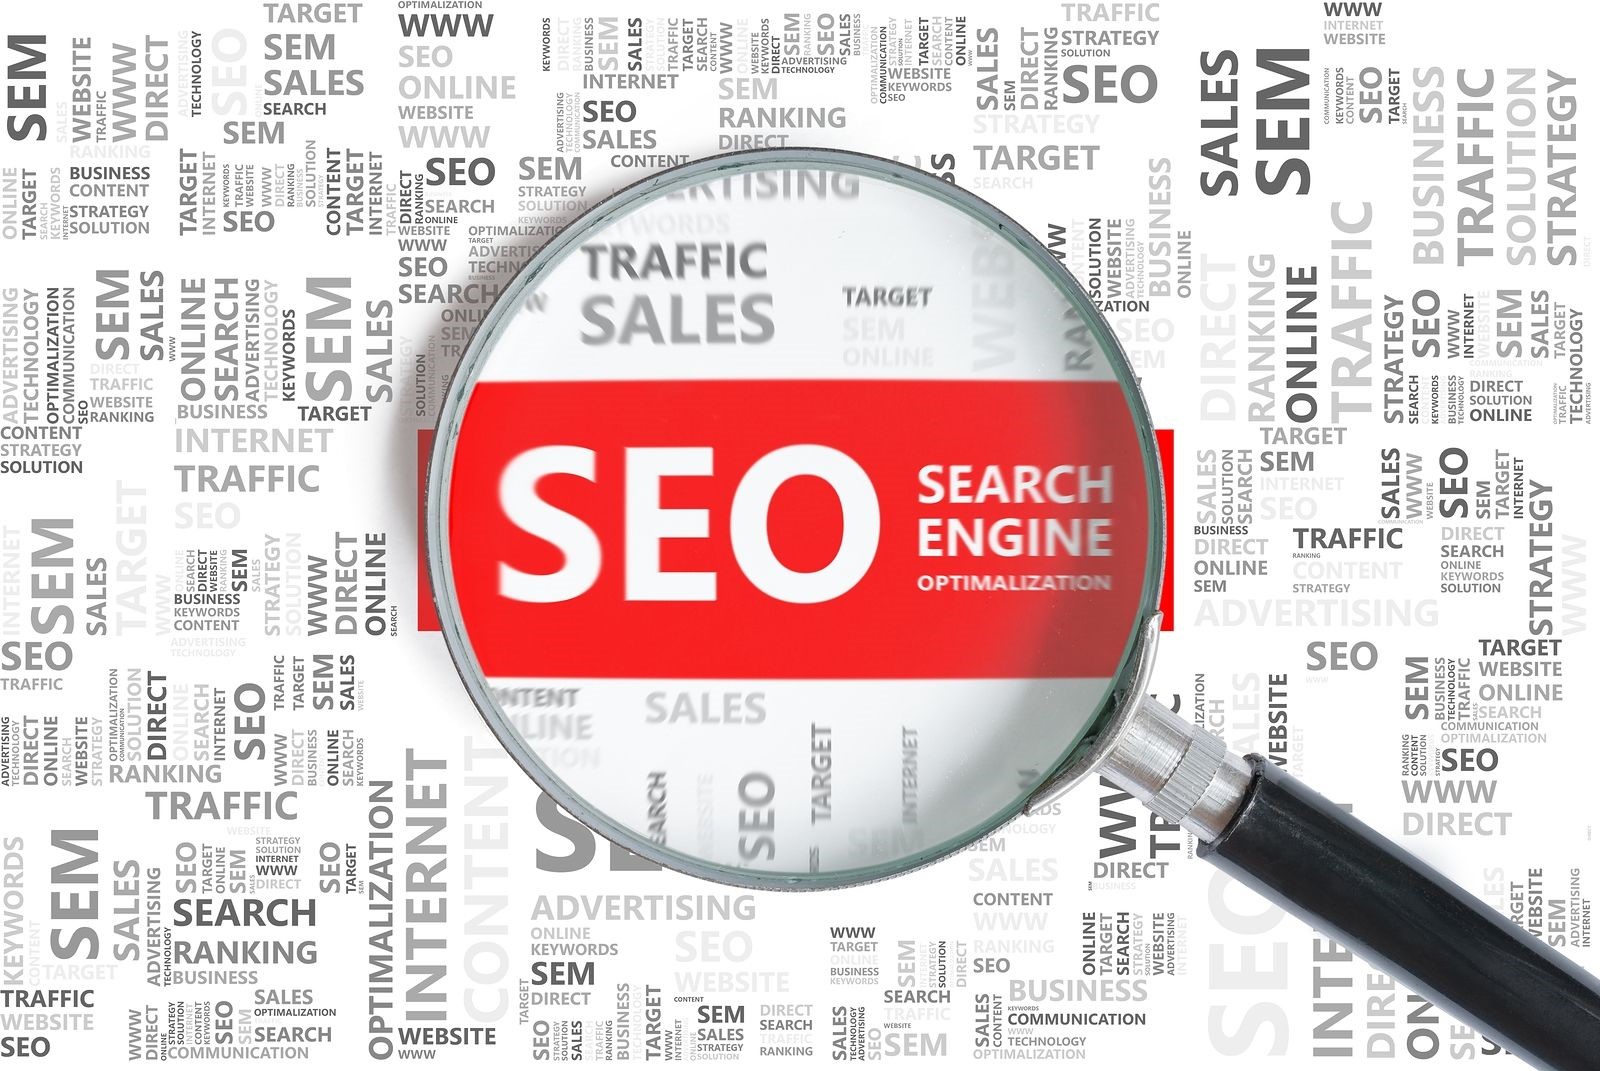 SEO Companies Can Help You Decide Which Search Engines to Focus On